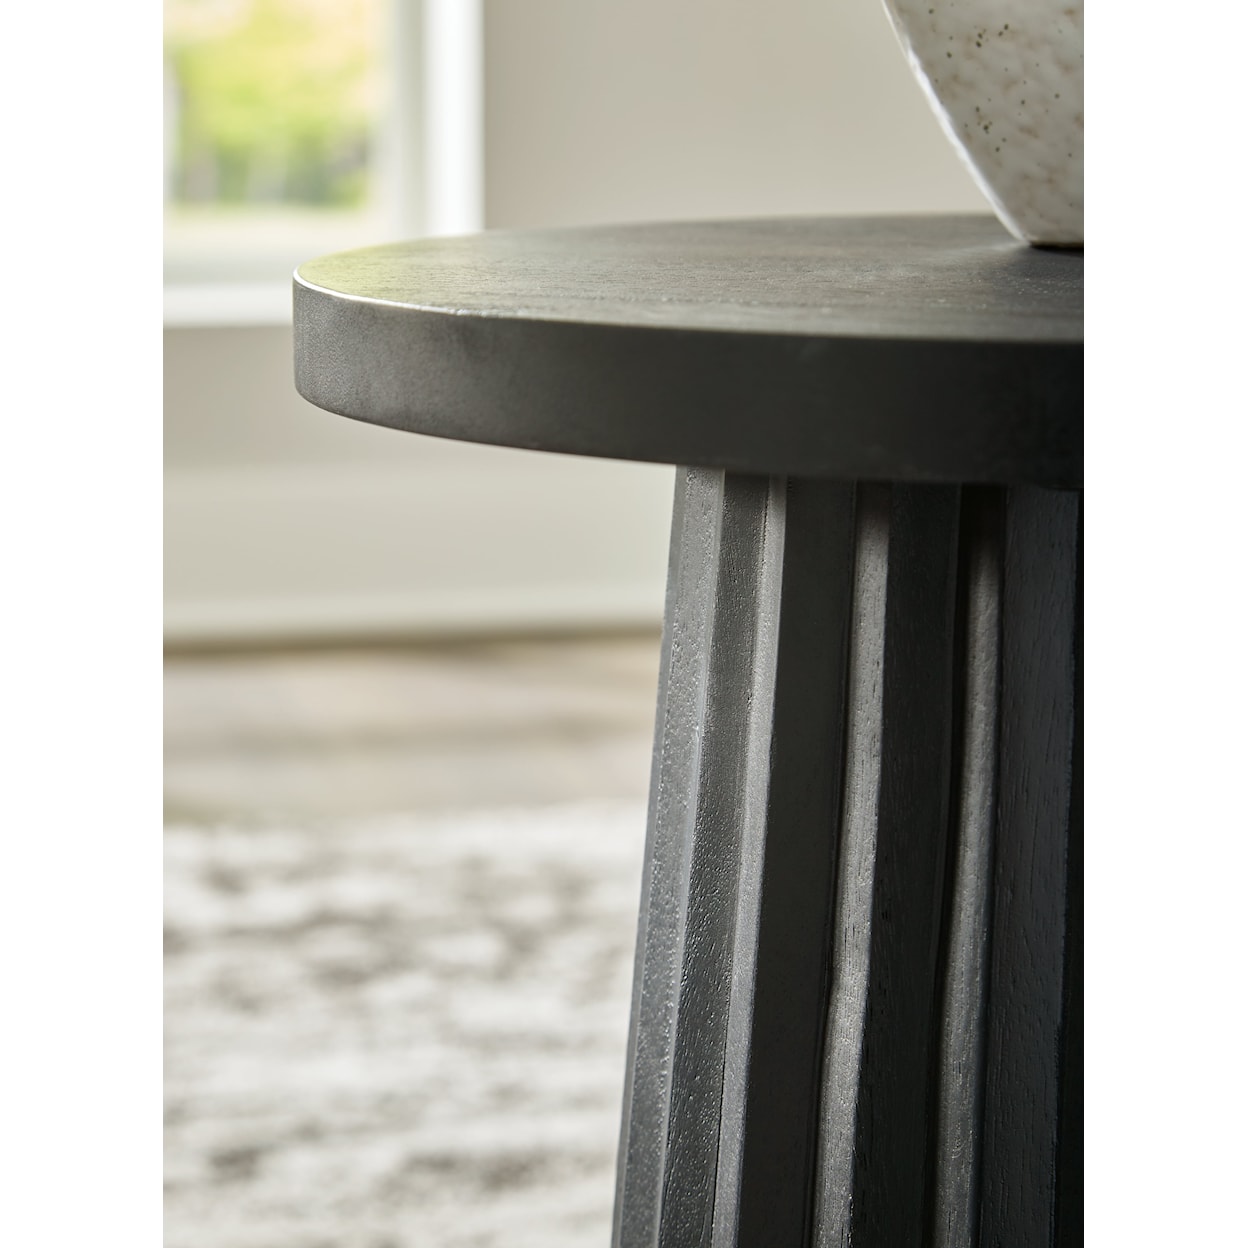 Signature Ceilby Accent Table